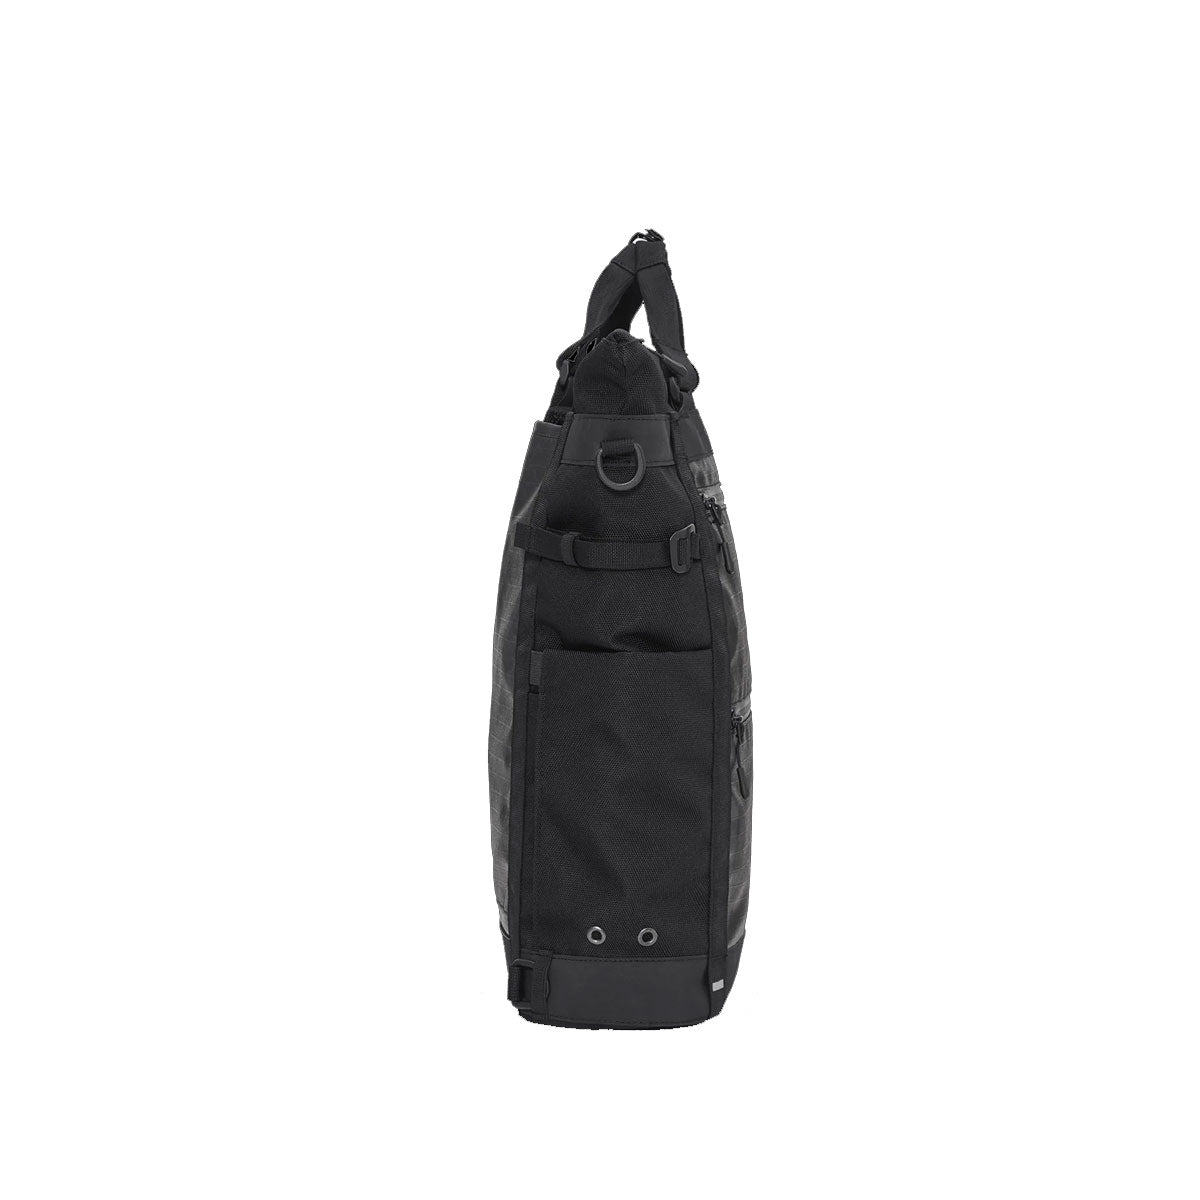 Groundtruth : RIKR 17L Technical Tote : Black